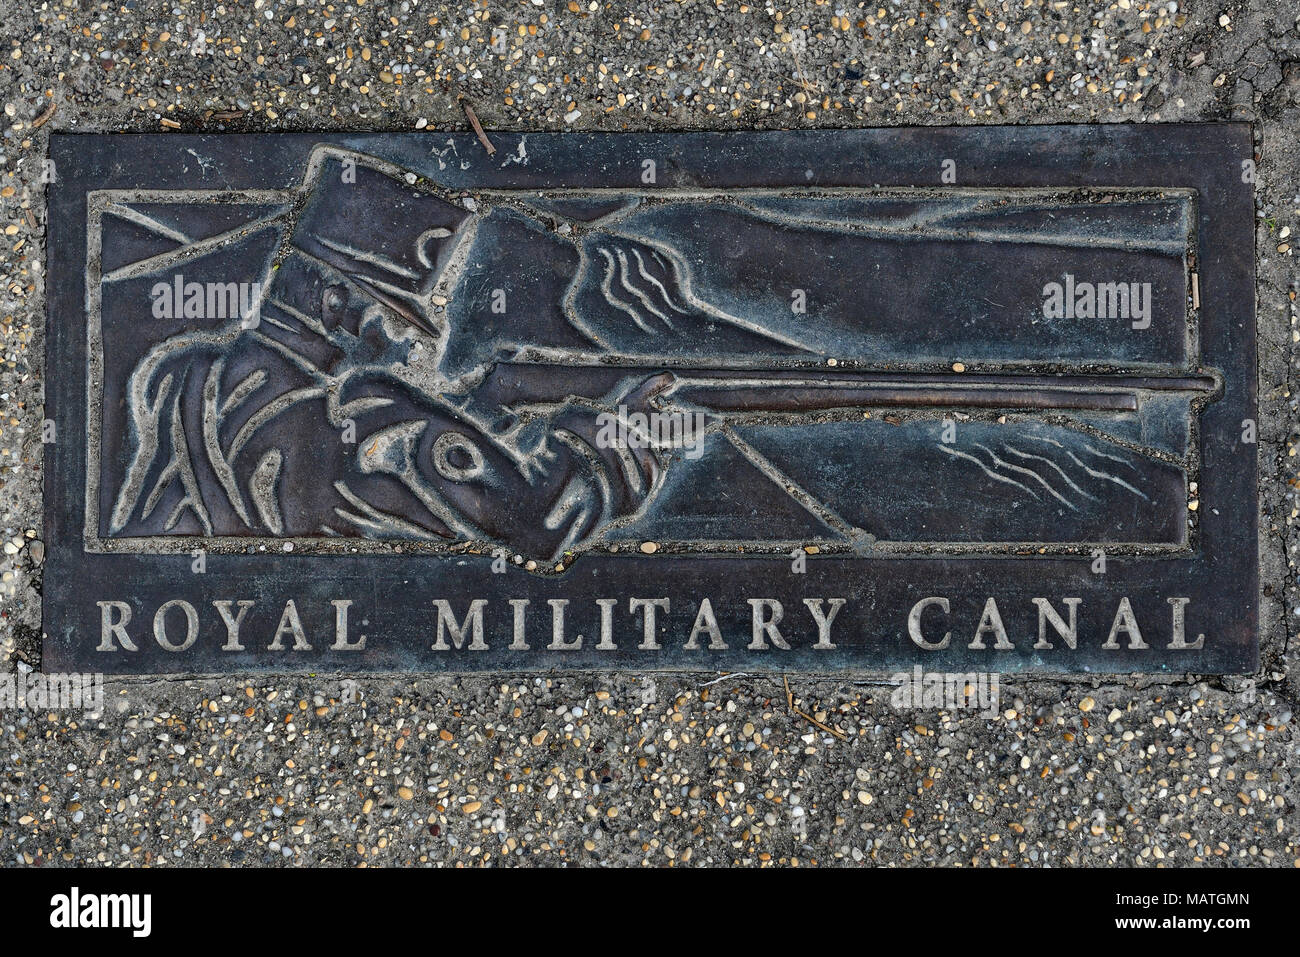 Royal Military Canal plaque, Hythe, Kent, England, UK Stock Photo